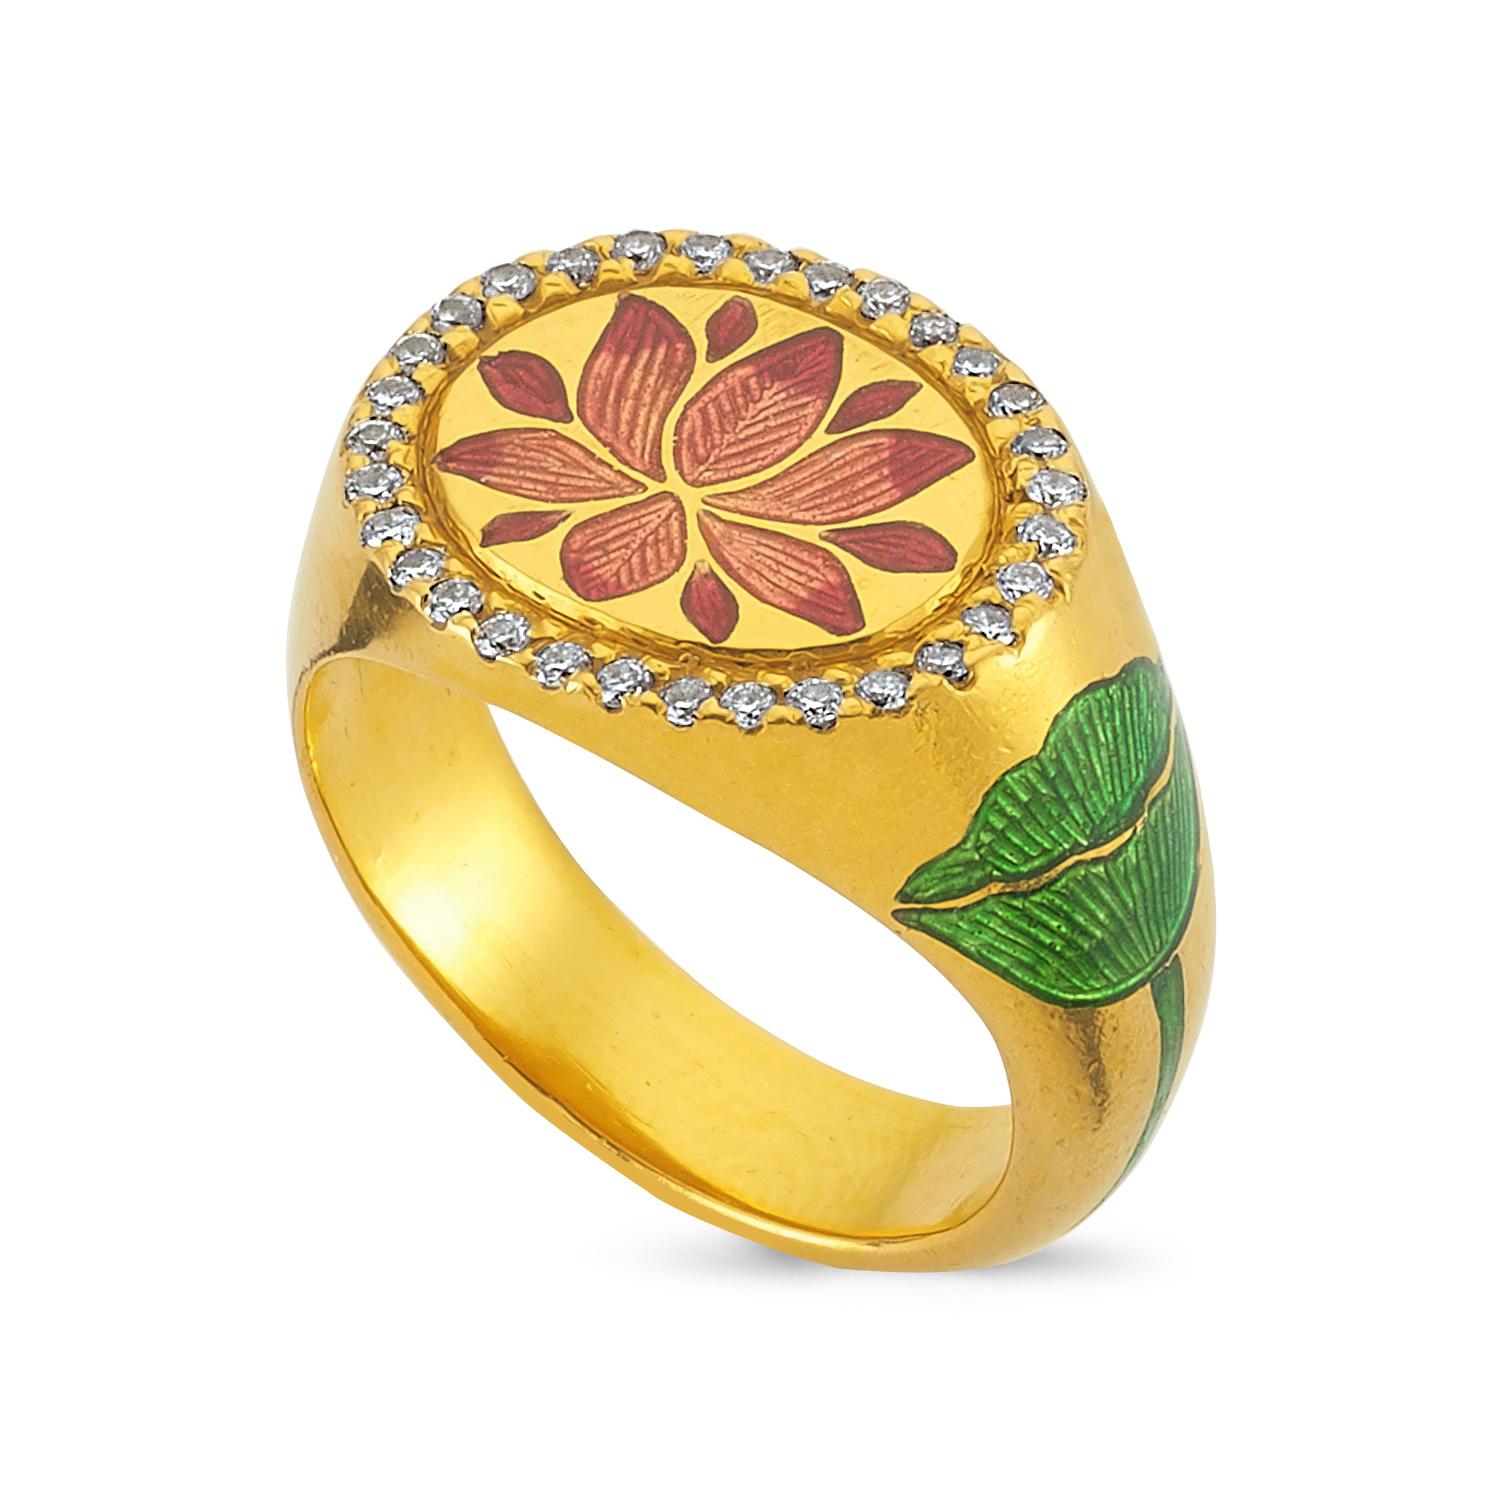 

Kamala comes from the Hindi word for lotus, a flower with deep cultural significance in Asia. It mirrors the transformation of the consciousness from closed bud, to unfolded flower in its form. Handcrafted in Jaipur, the Kamala Ring is radiant